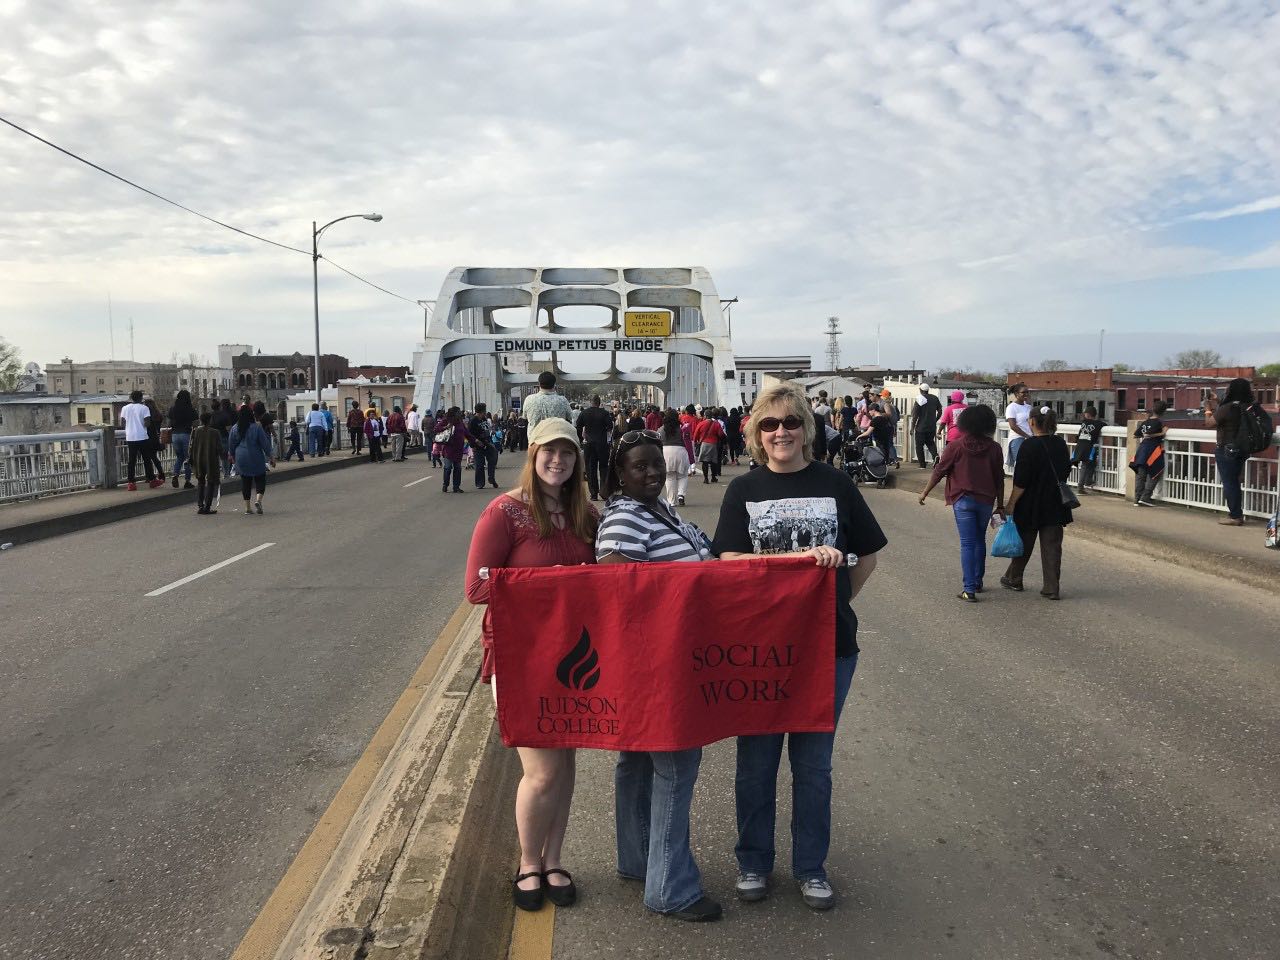 Ms. Dennison and students proudly display the Judson College Social Work Banner as they march over Selma’s historic Edmund Pettus Bridge.